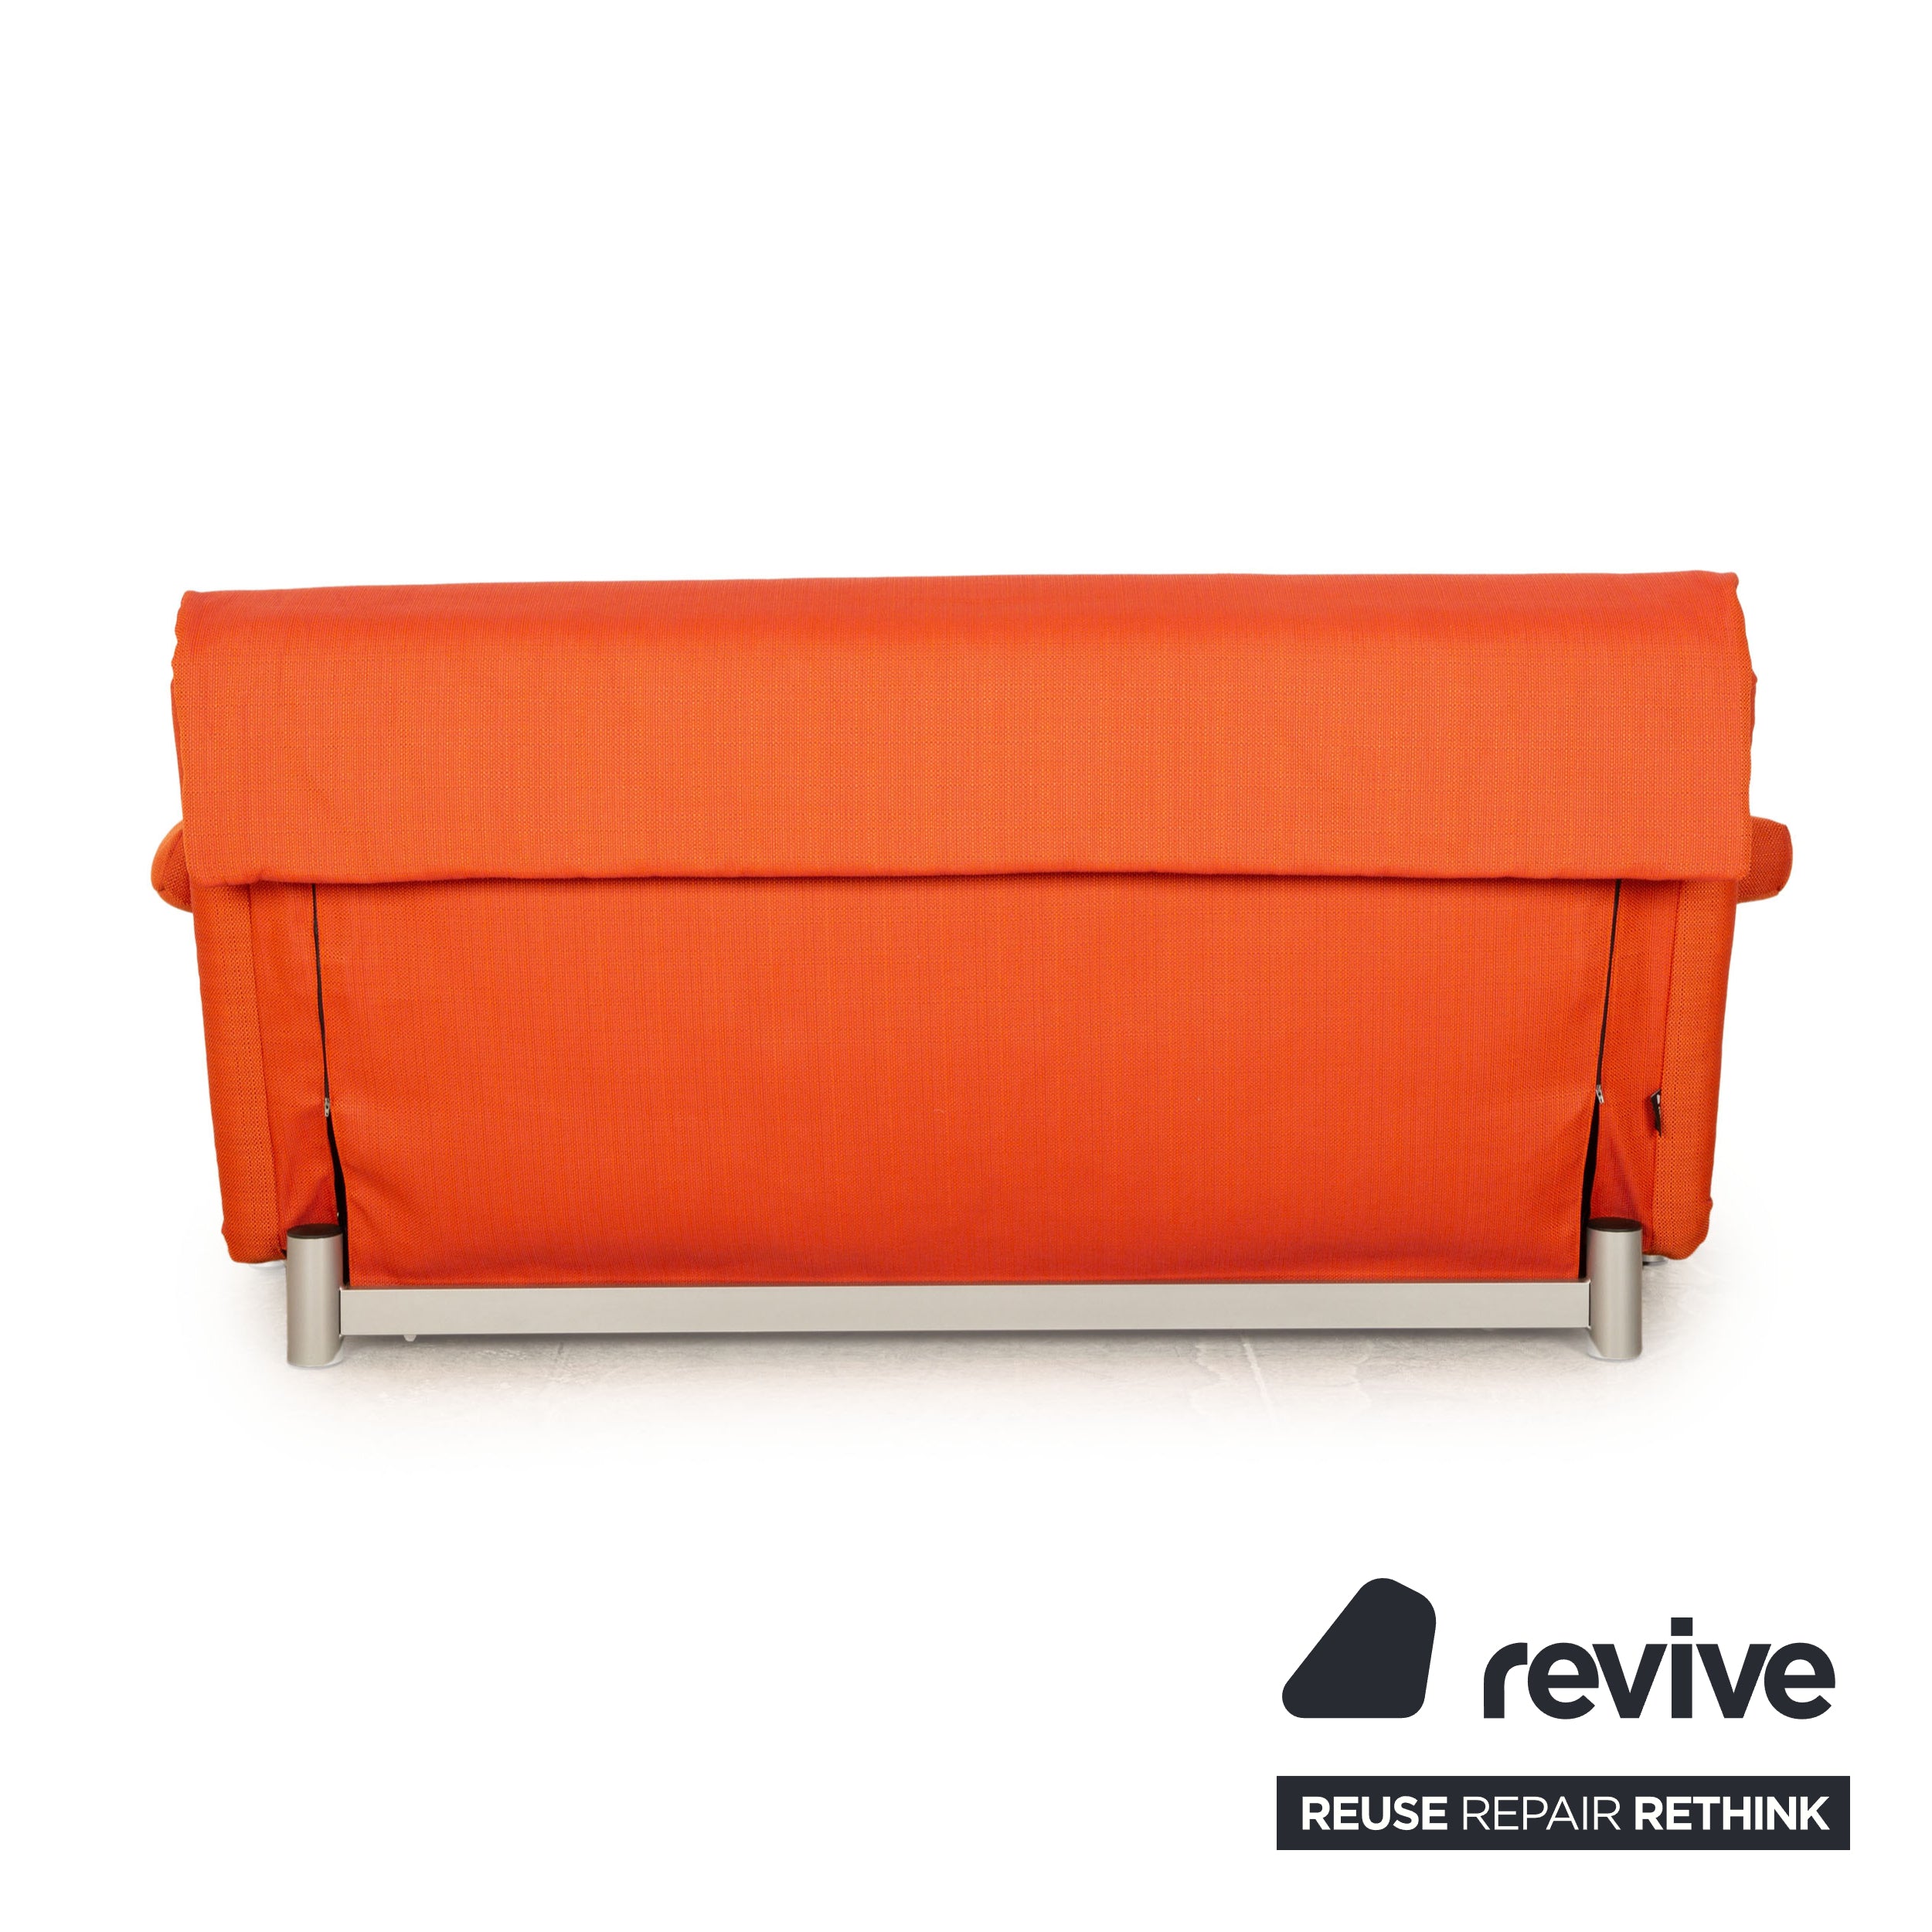 ligne roset Multy fabric three-seater orange sofa couch with armrests and BULTEX mattress sleeping function new cover